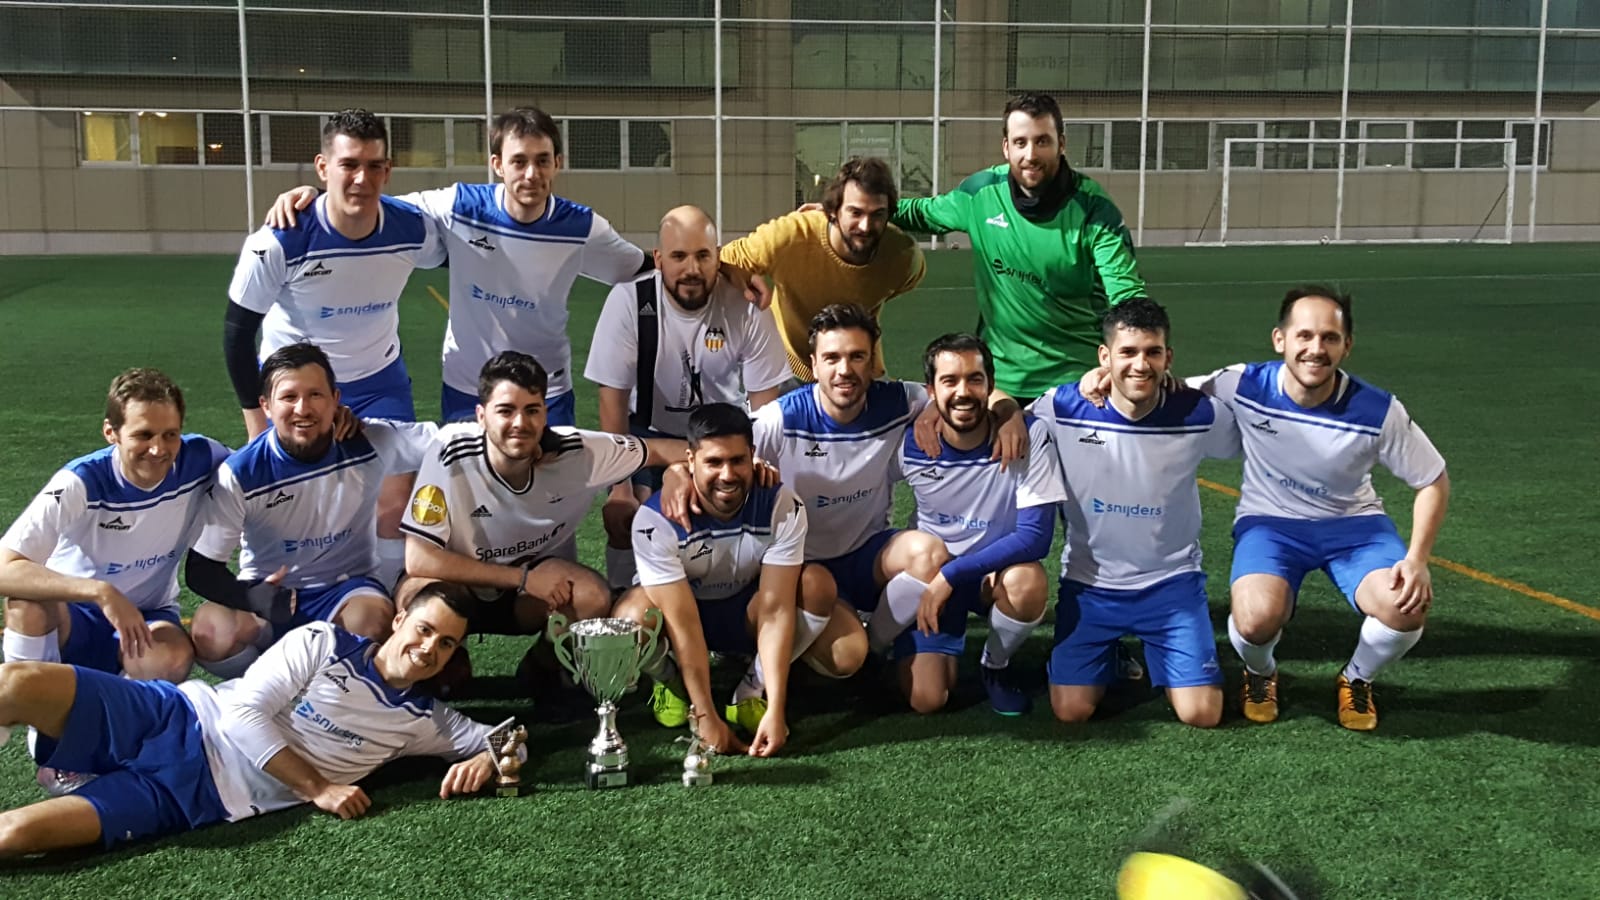 Spanish colleagues achieve first place in football competition!